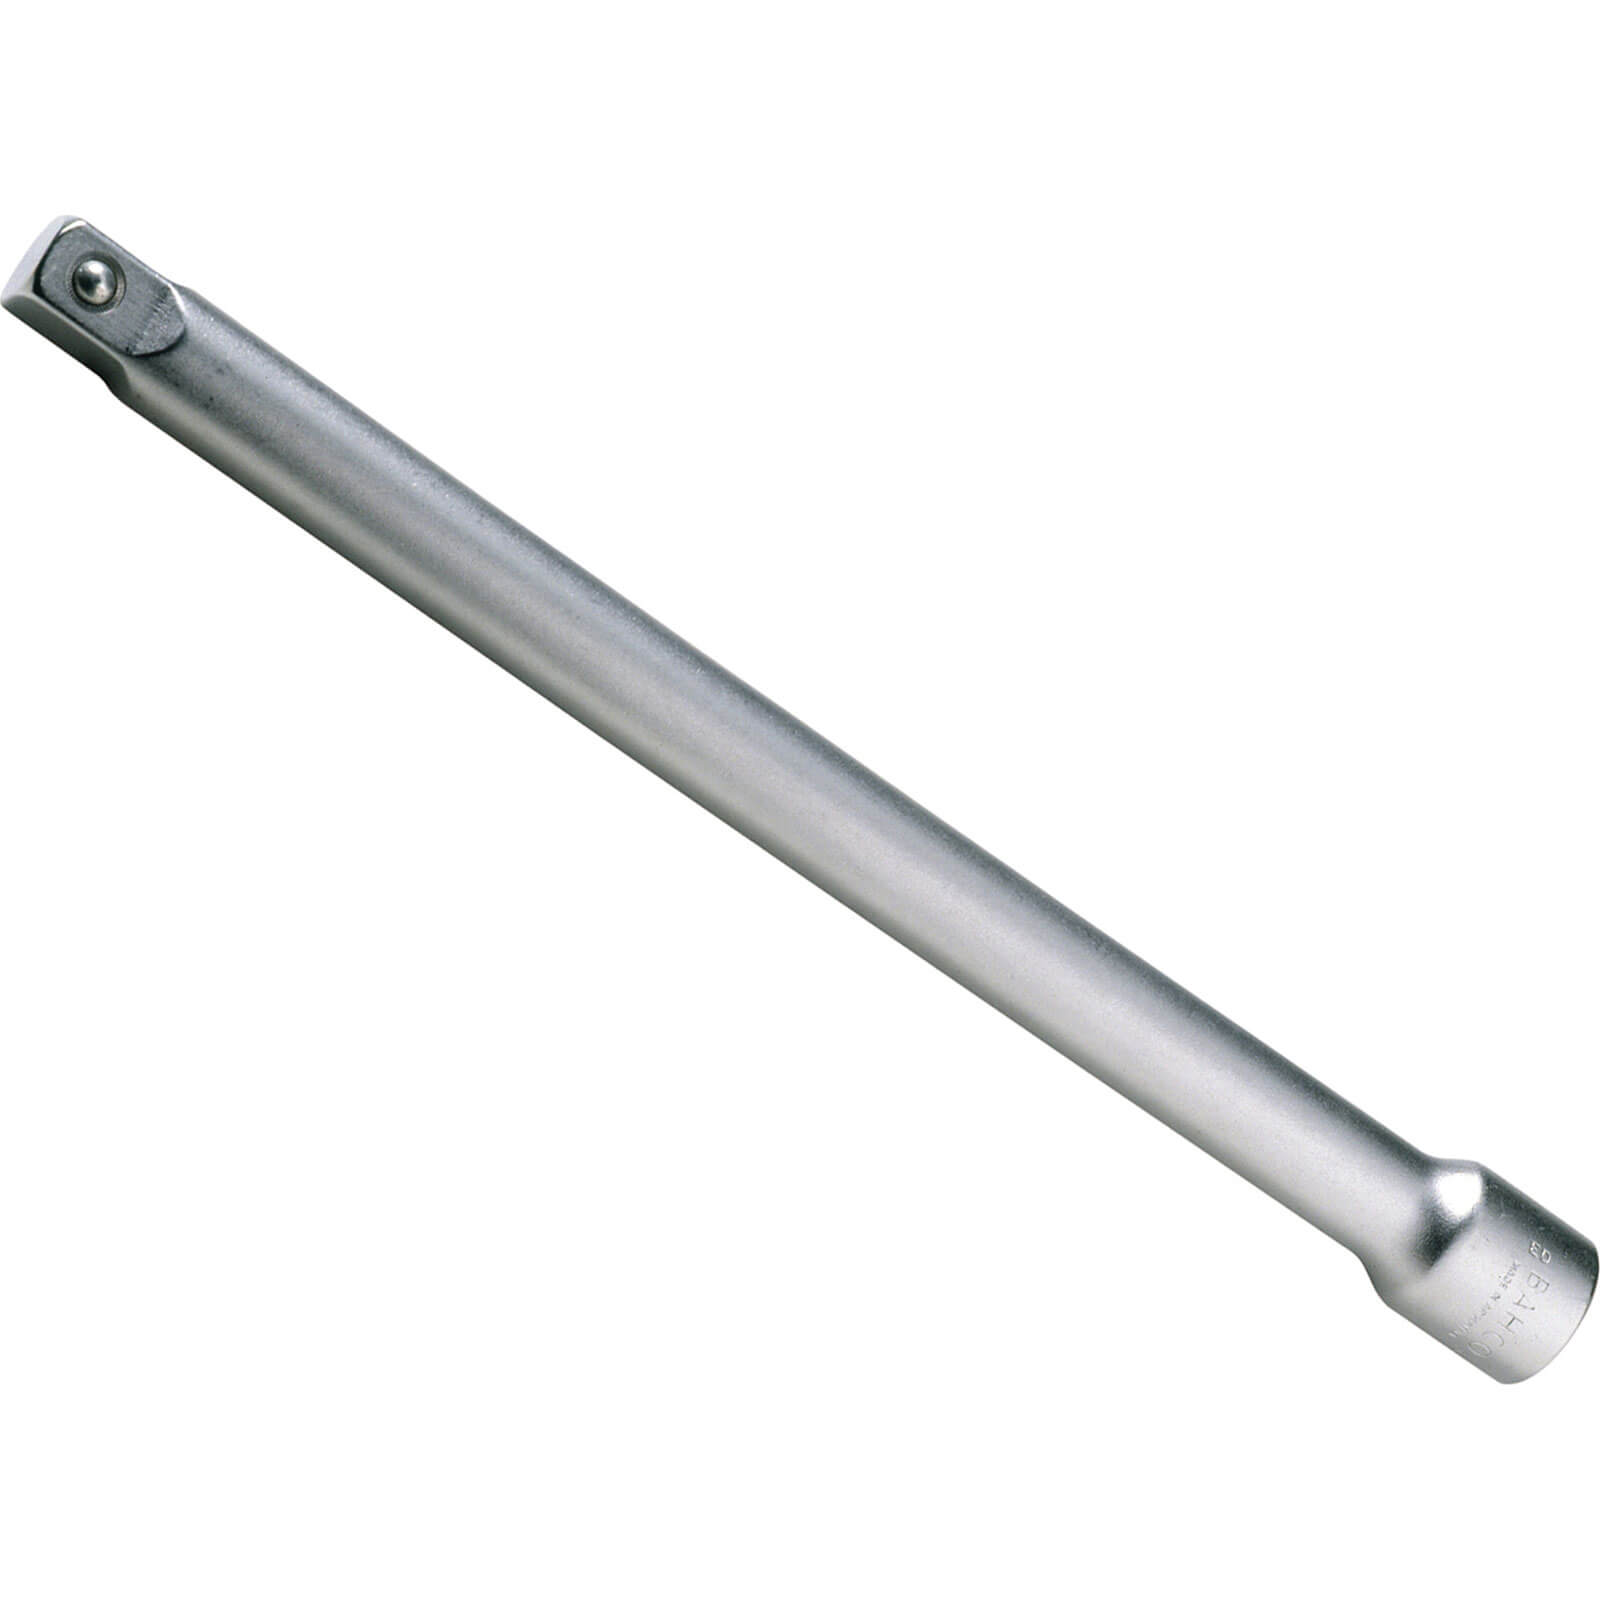 Bahco Extension Bar 3" 1/2" Square Drive Sbs83-3